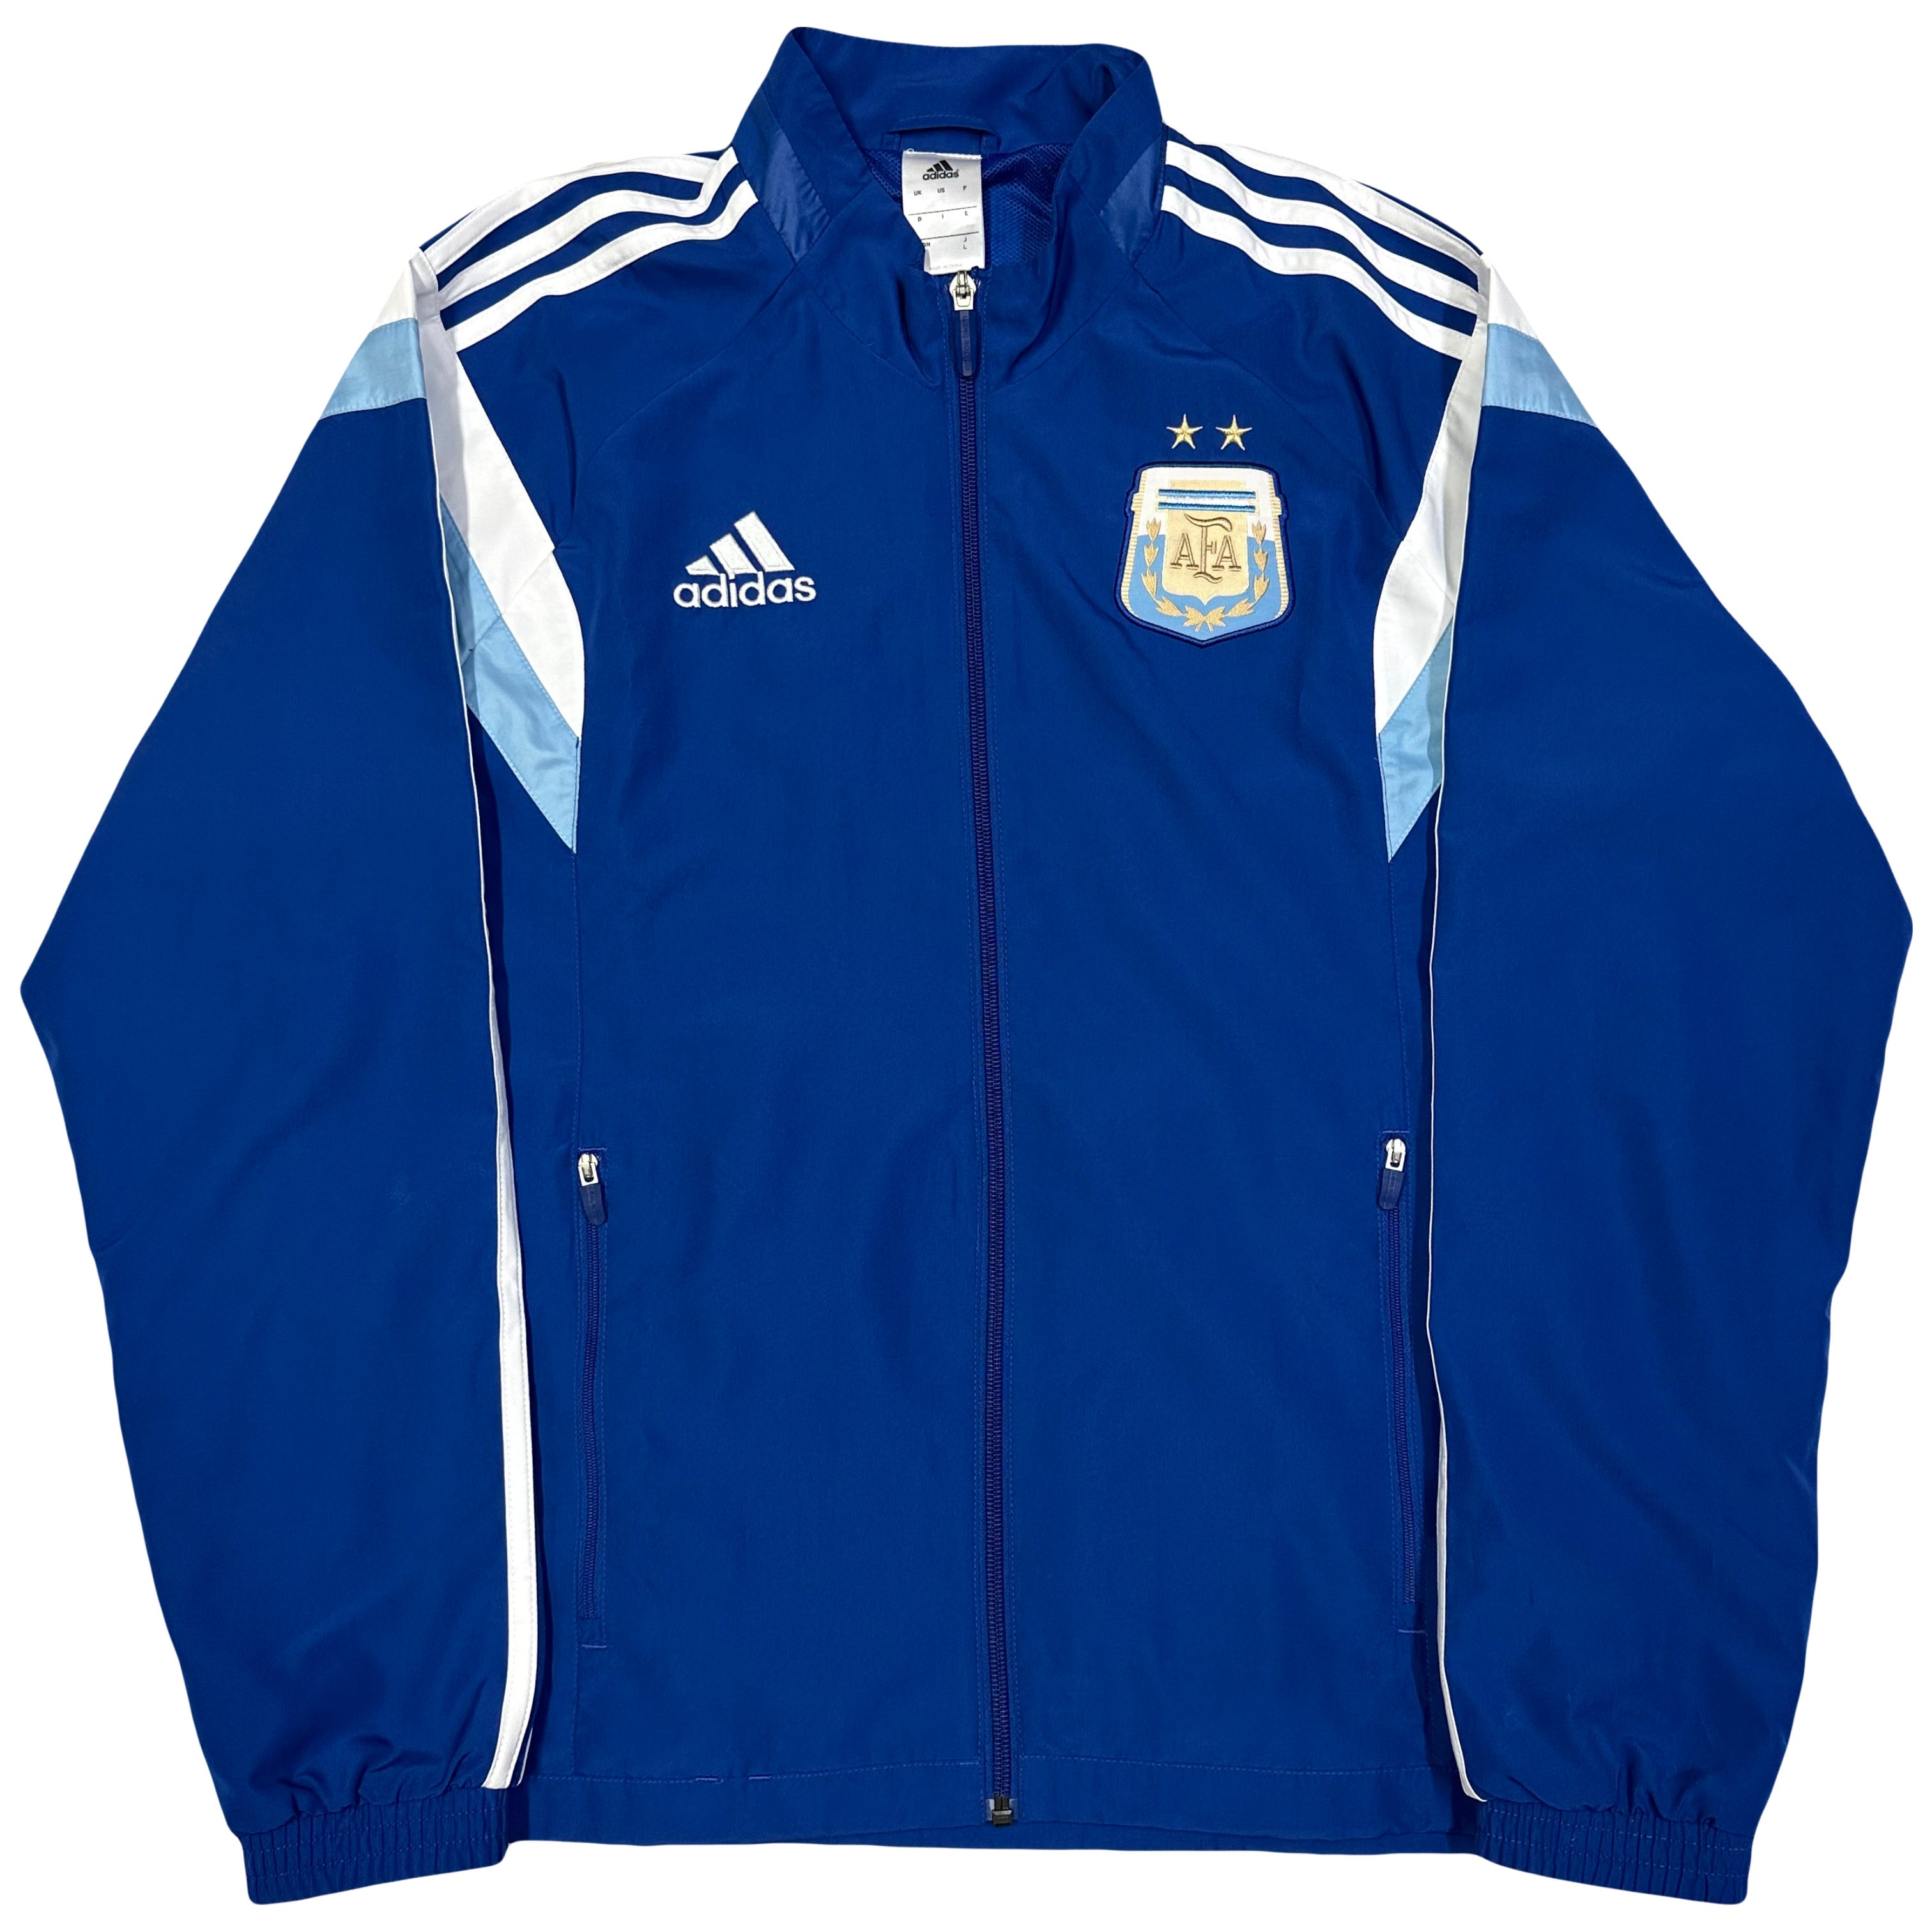 Adidas Argentina 2014/15 Tracksuit In Blue ( M )